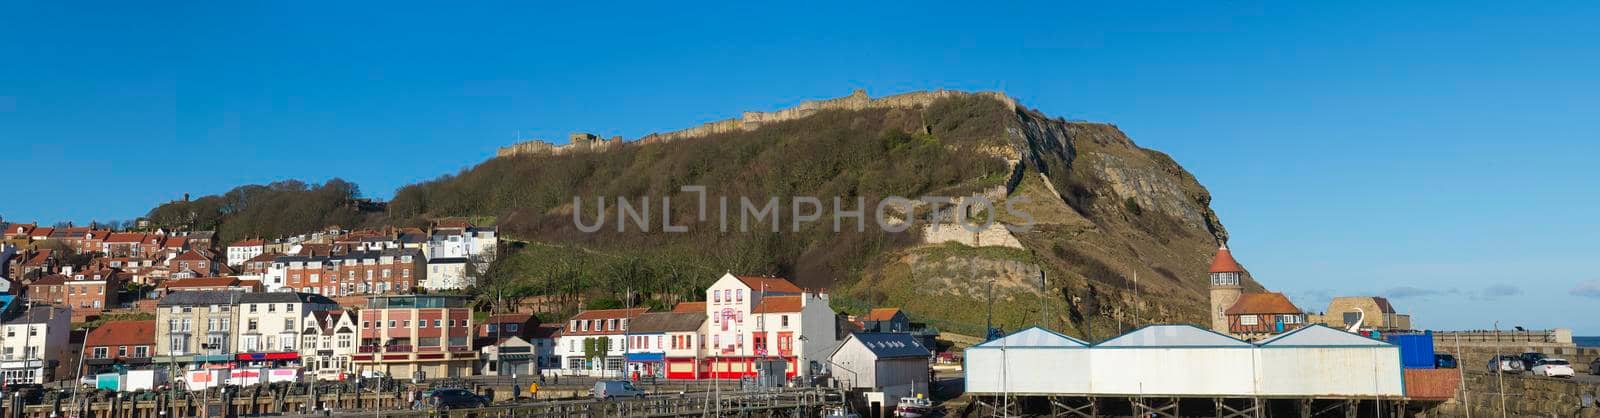 Landscape panorama view of coastal seaside town harbor front with medieval castle on hill headland